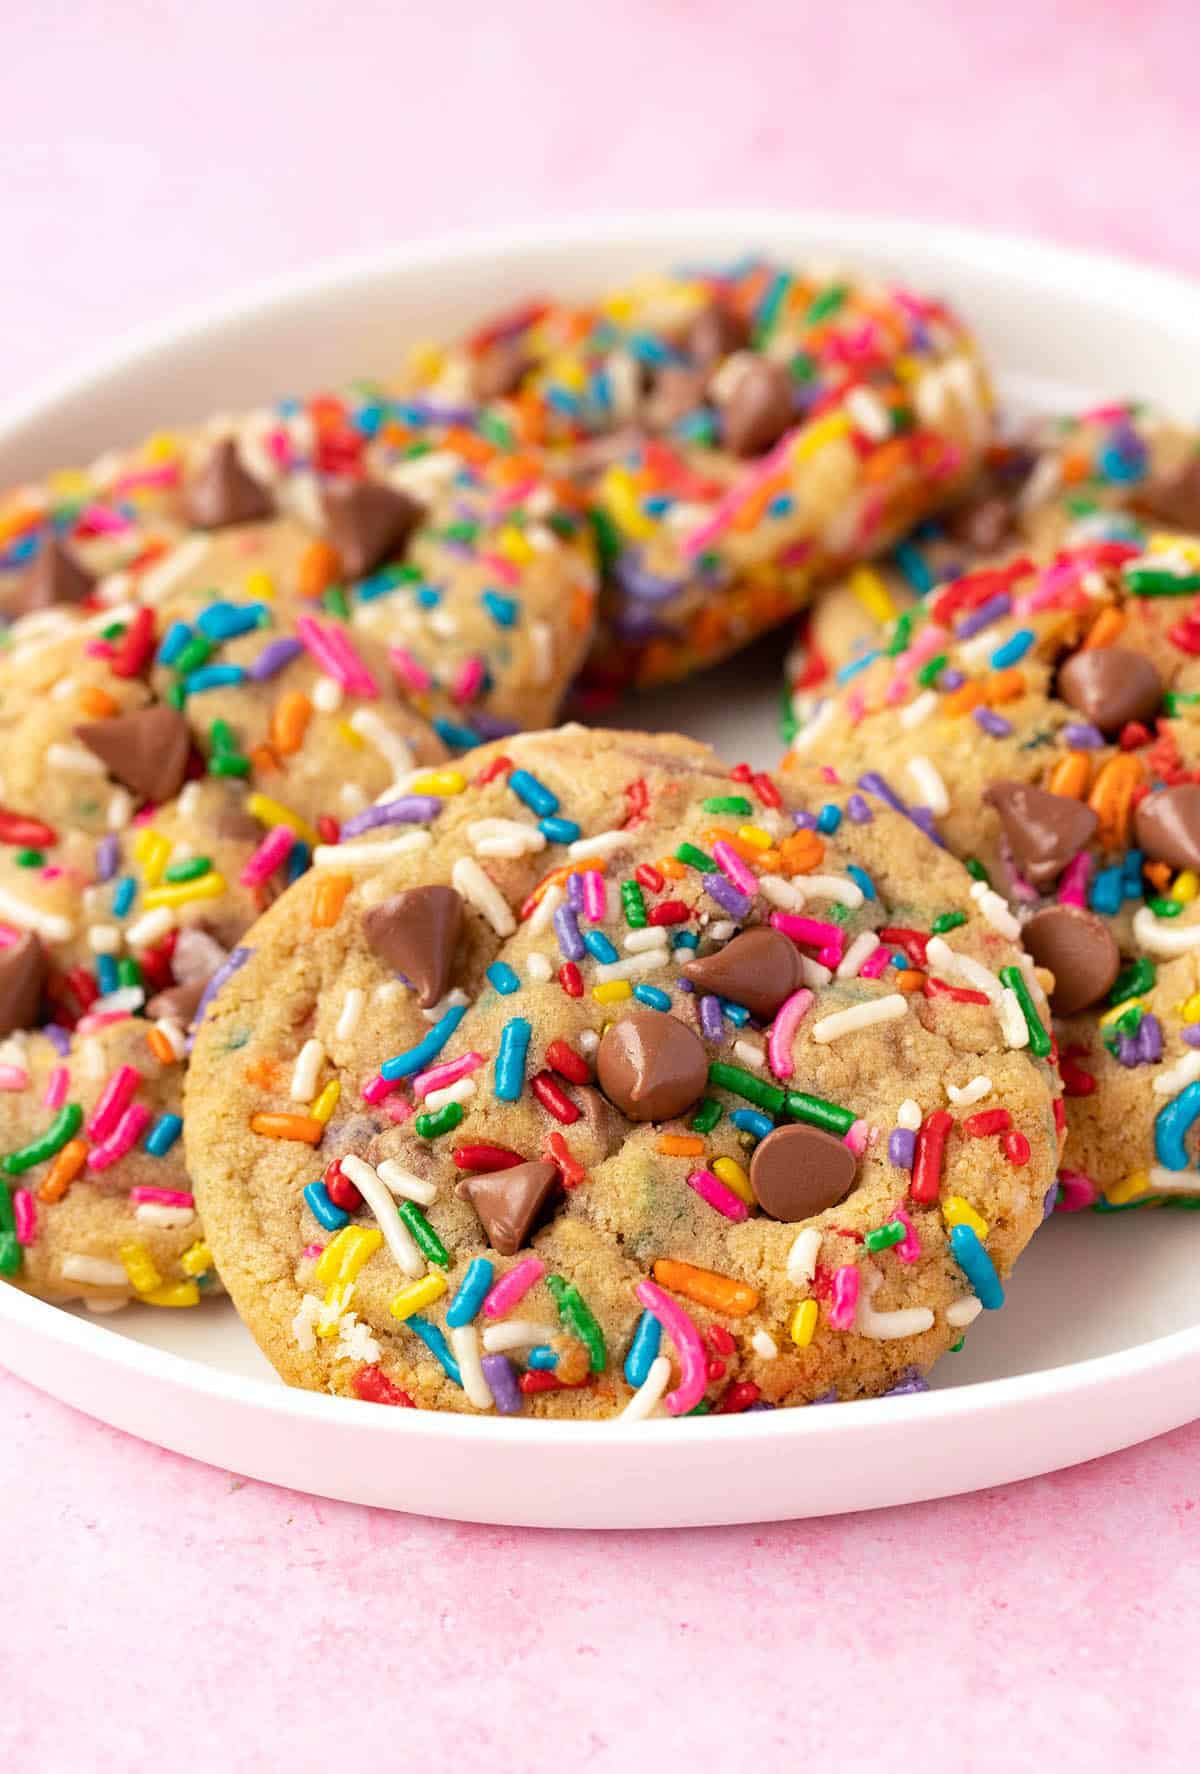 A beautiful plate of homemade Funfetti Chocolate Chip Cookies.